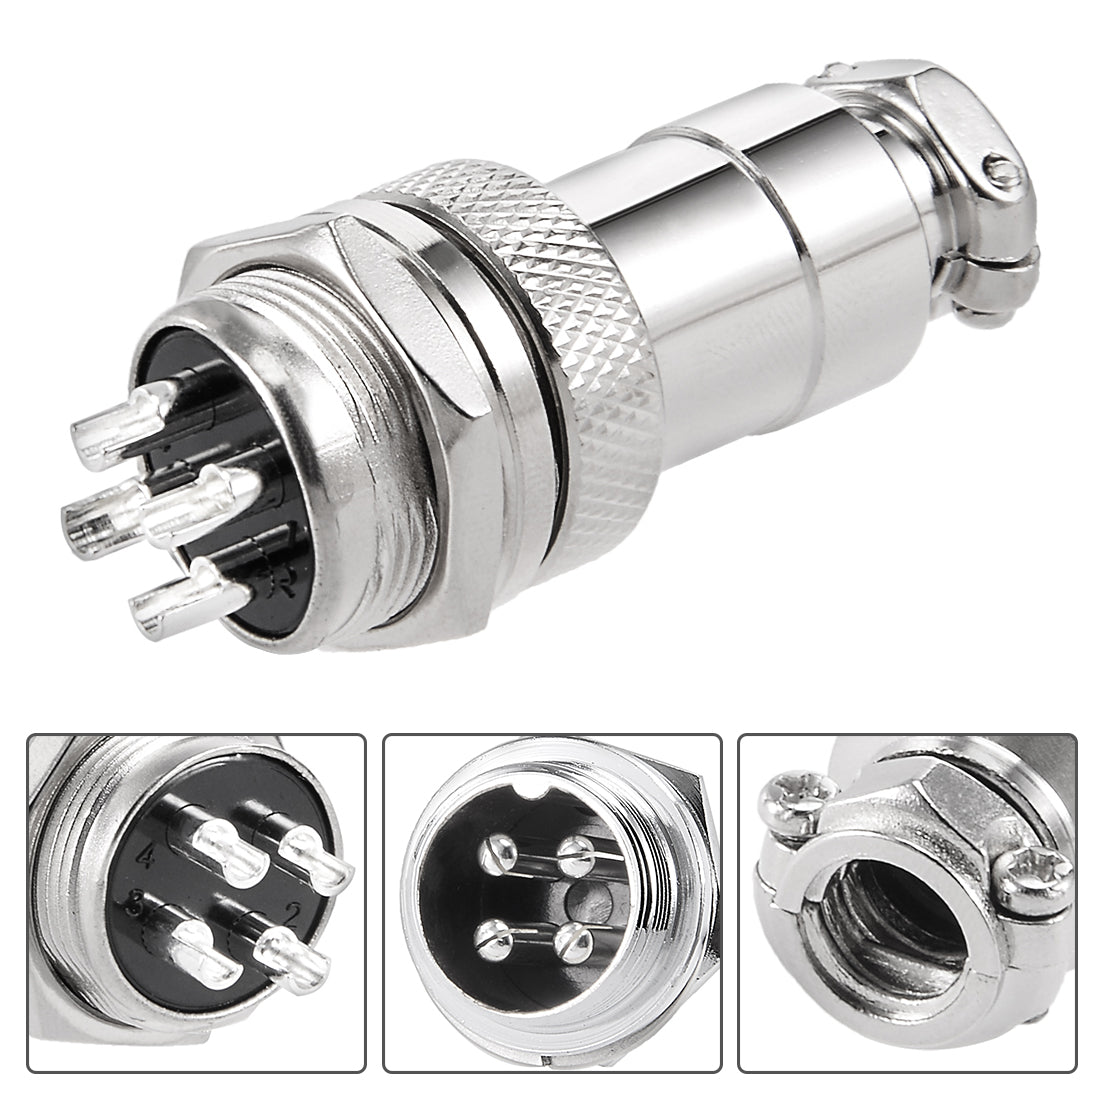 uxcell Uxcell 5pcs Aviation Connector 16mm 4P 5A 125V GX16-4 Waterproof Male Wire Panel Power Chassis Metal Fittings Connector Aviation Silver Tone